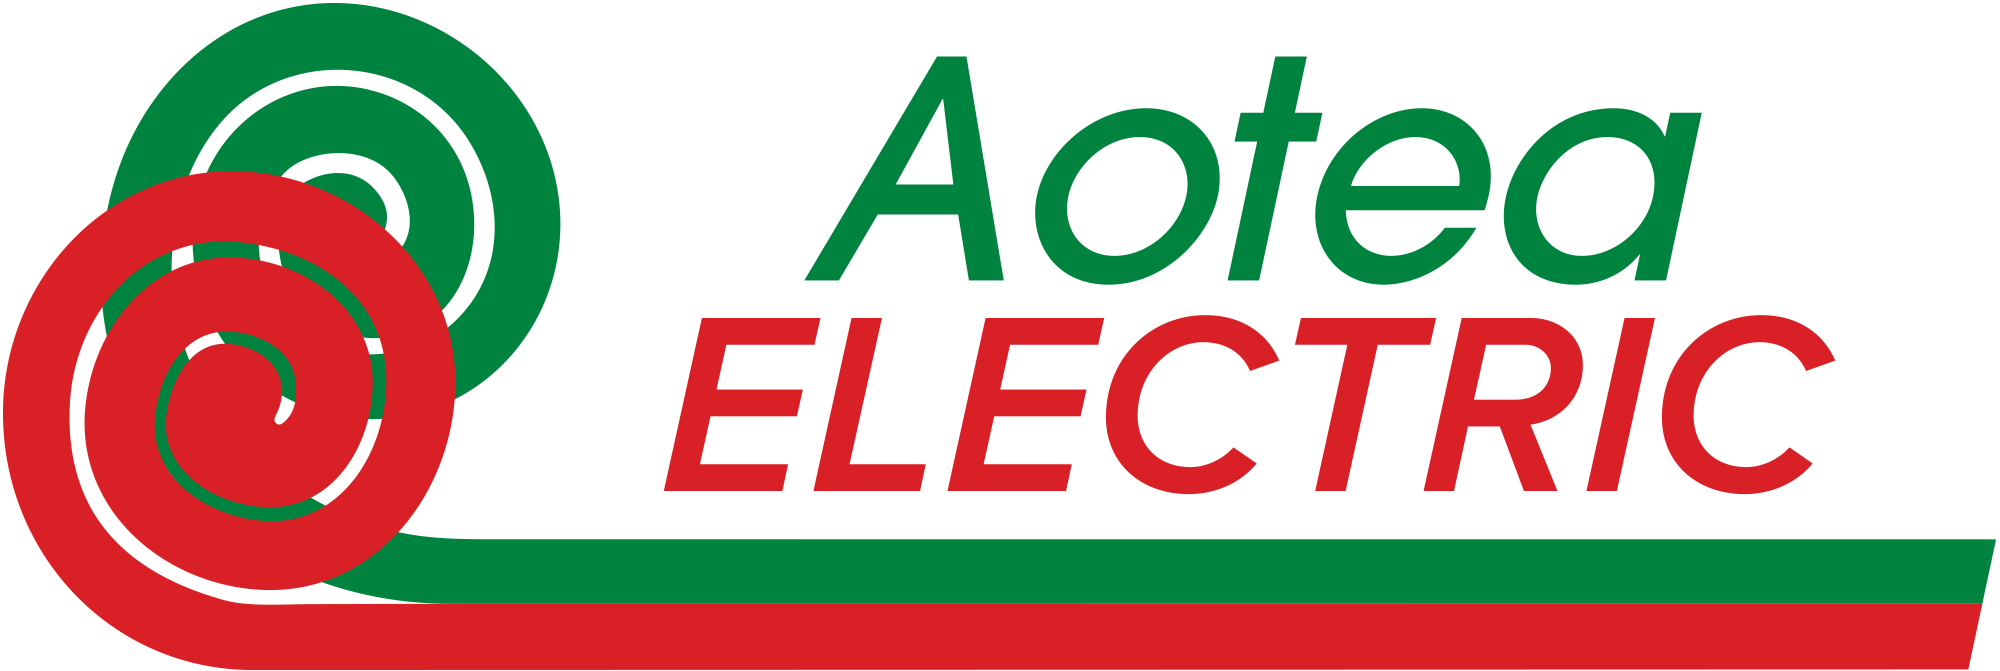 Aotea Electric Auckland Limited